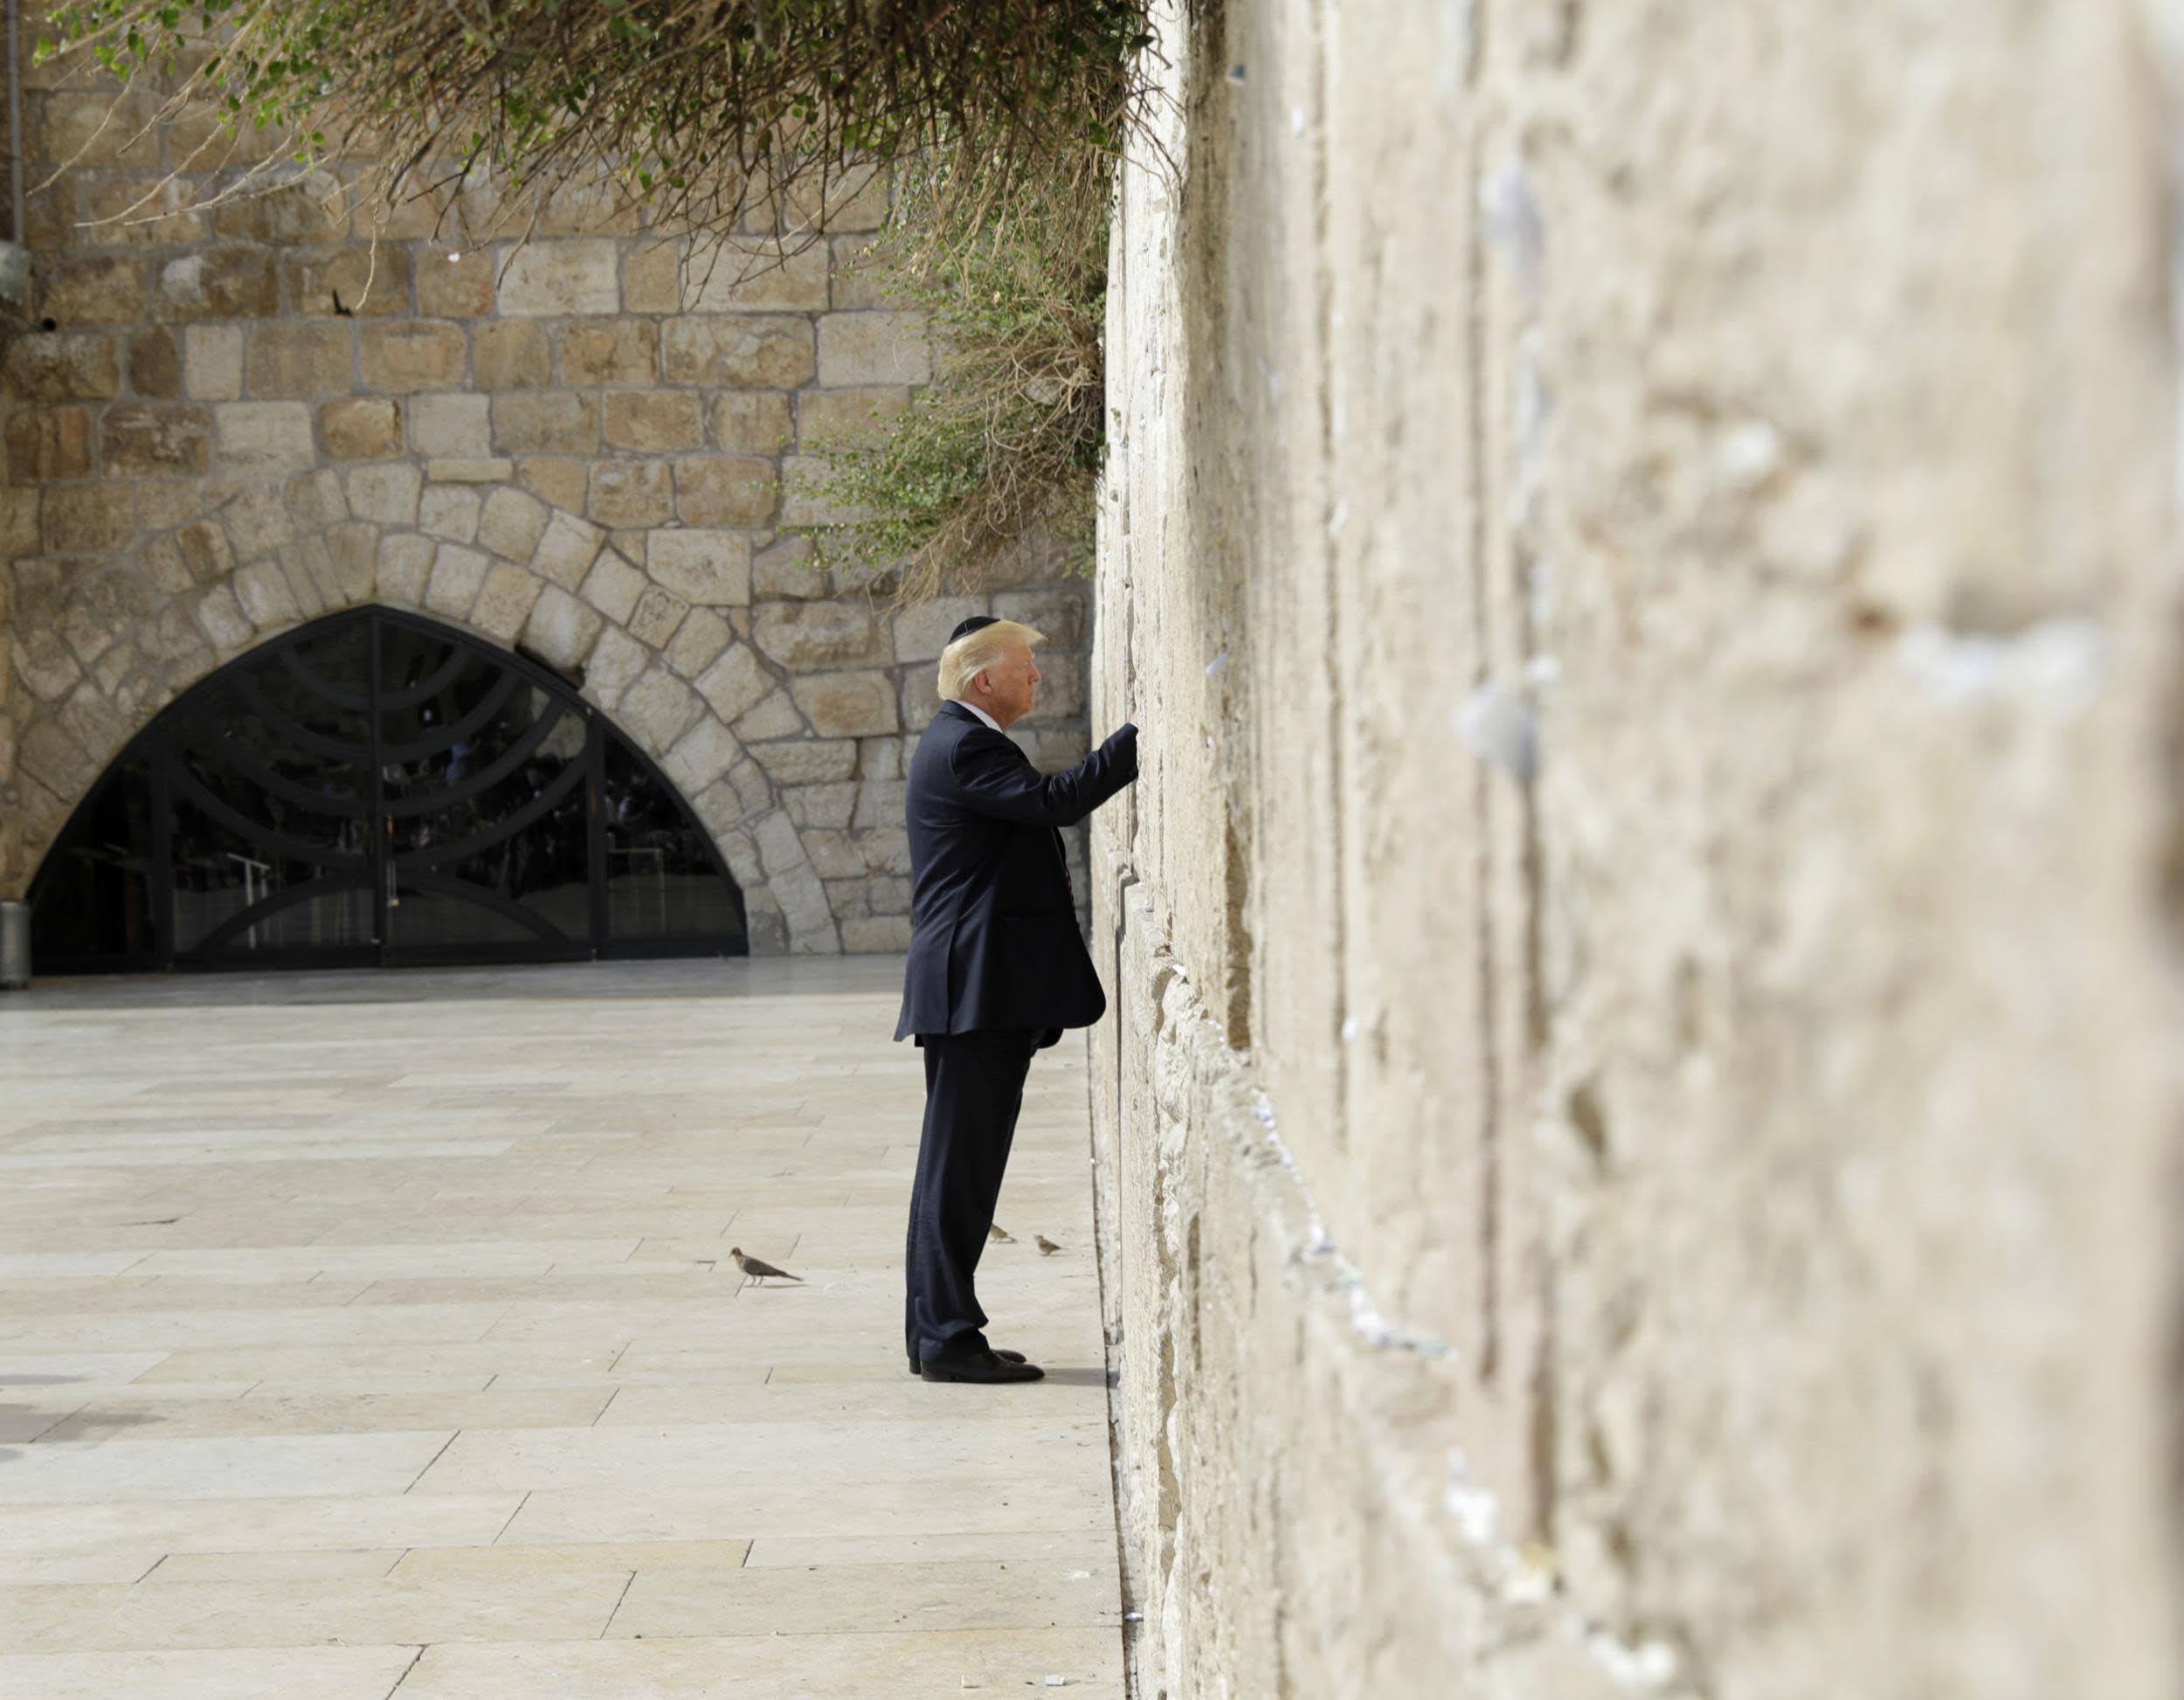 Donald Trump becomes first sitting US president to visit Western Wall